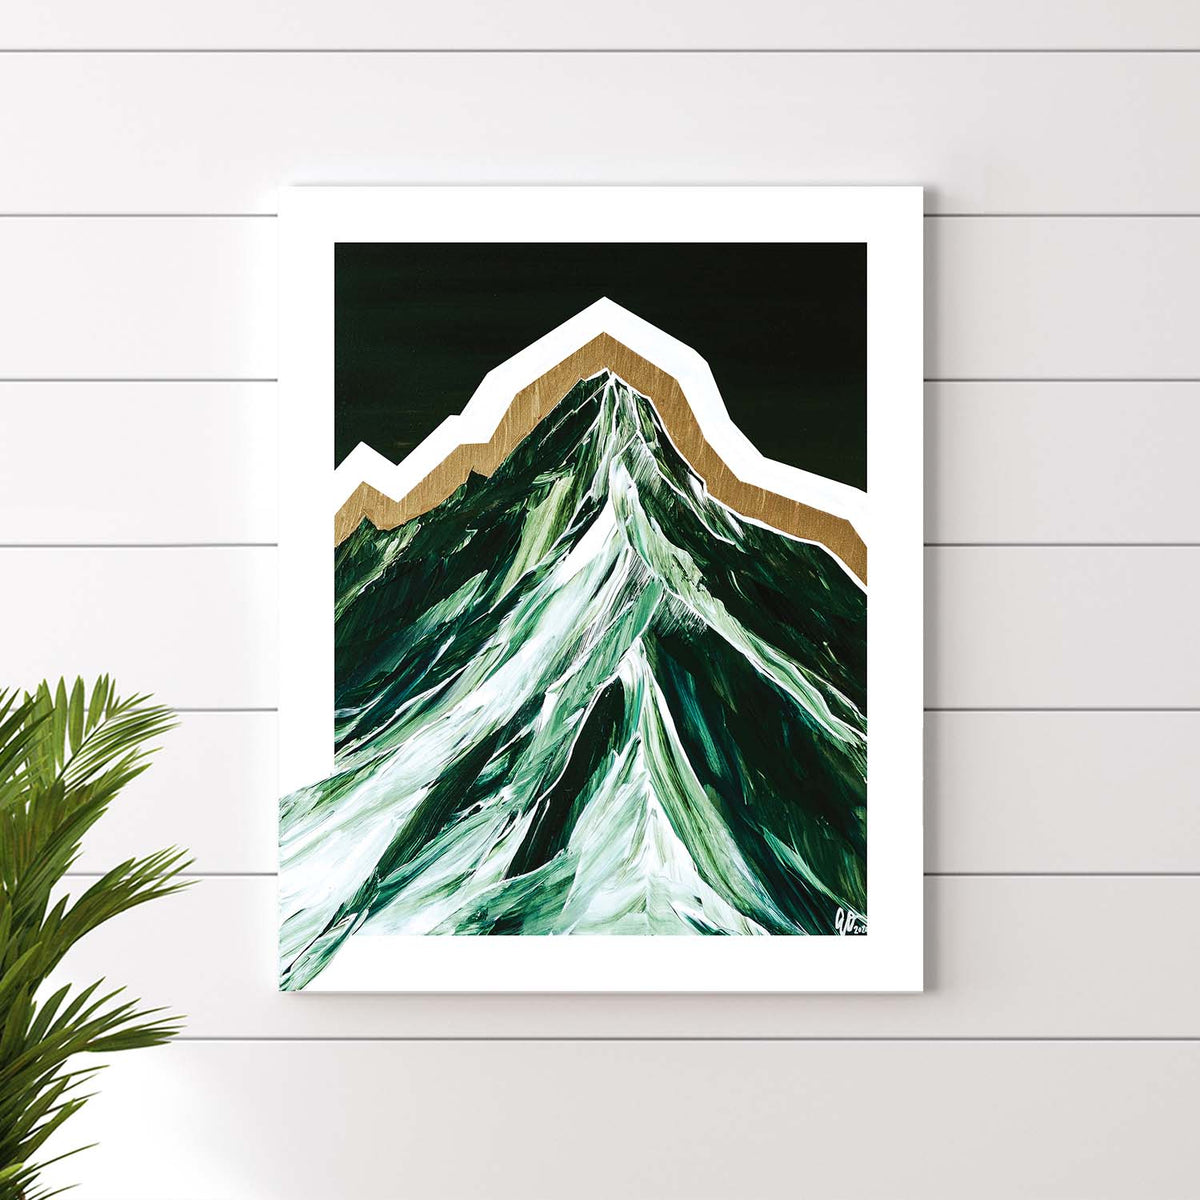 Find (Mt. Baker) - Canvas Print by Erin Oostra | Art Bloom Canvas Art